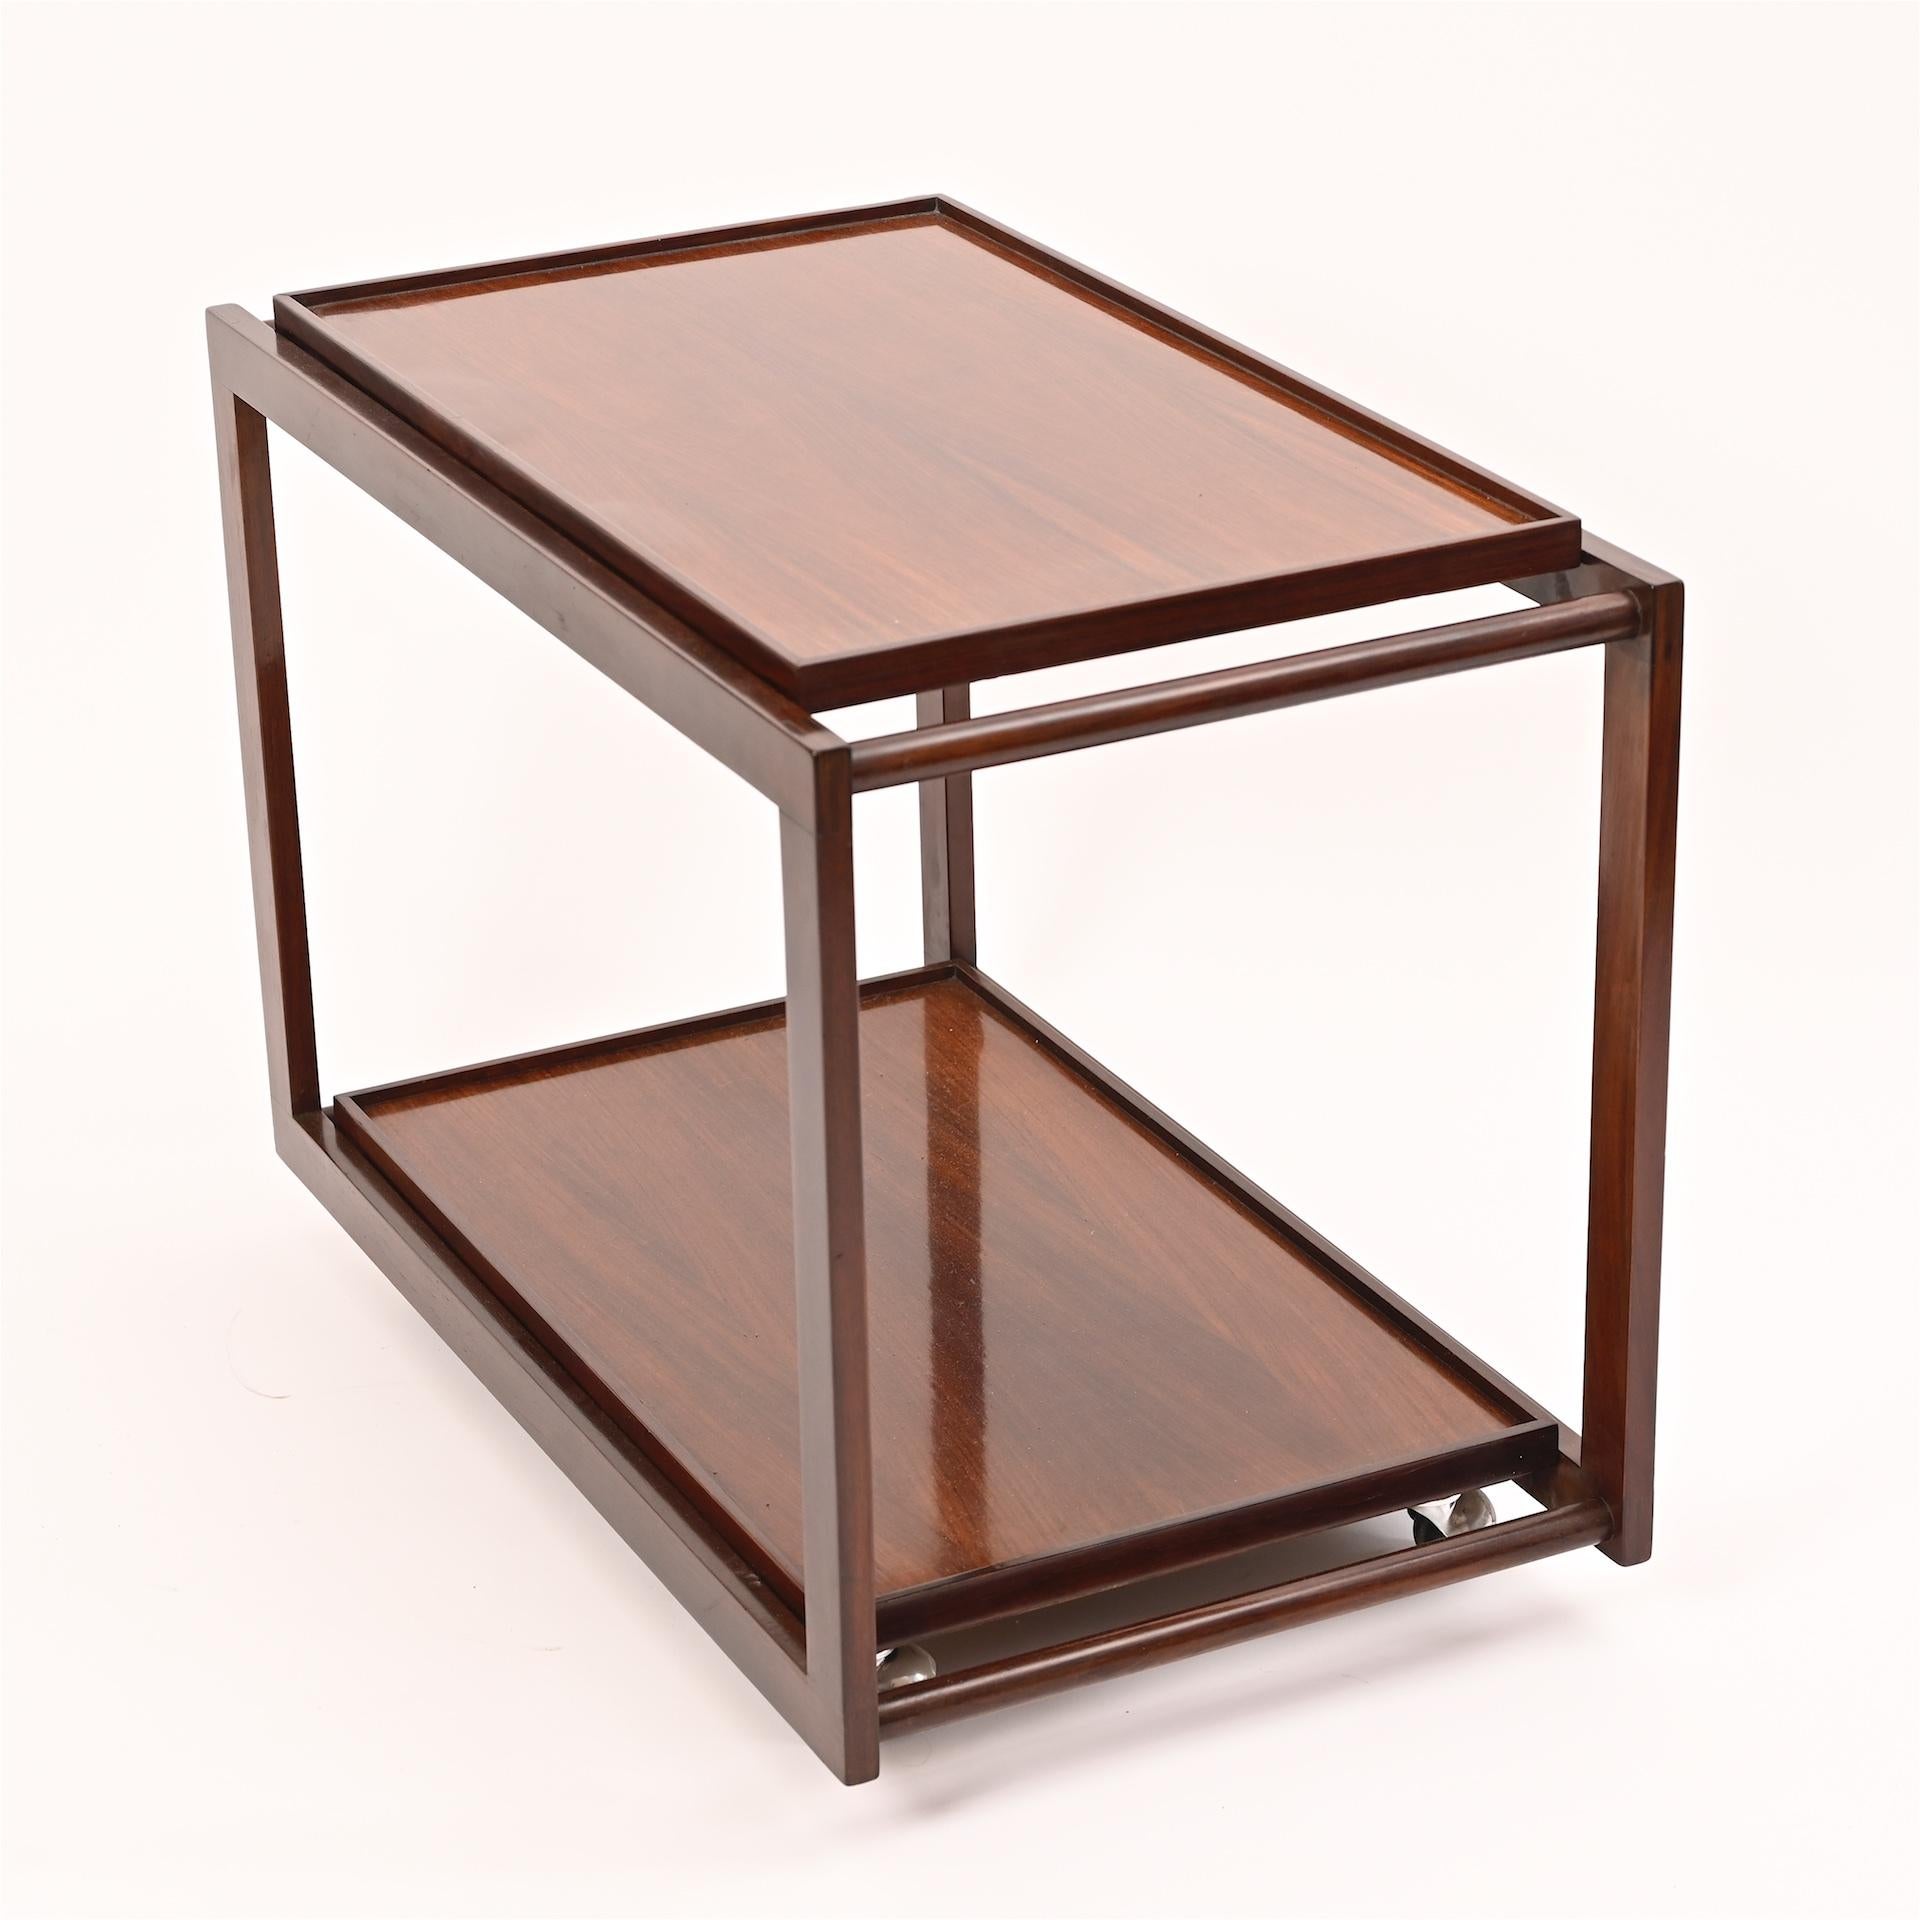 Exotic wood bar / trolley by Cassina. 

Restored and fully working with detachable tray inserts.